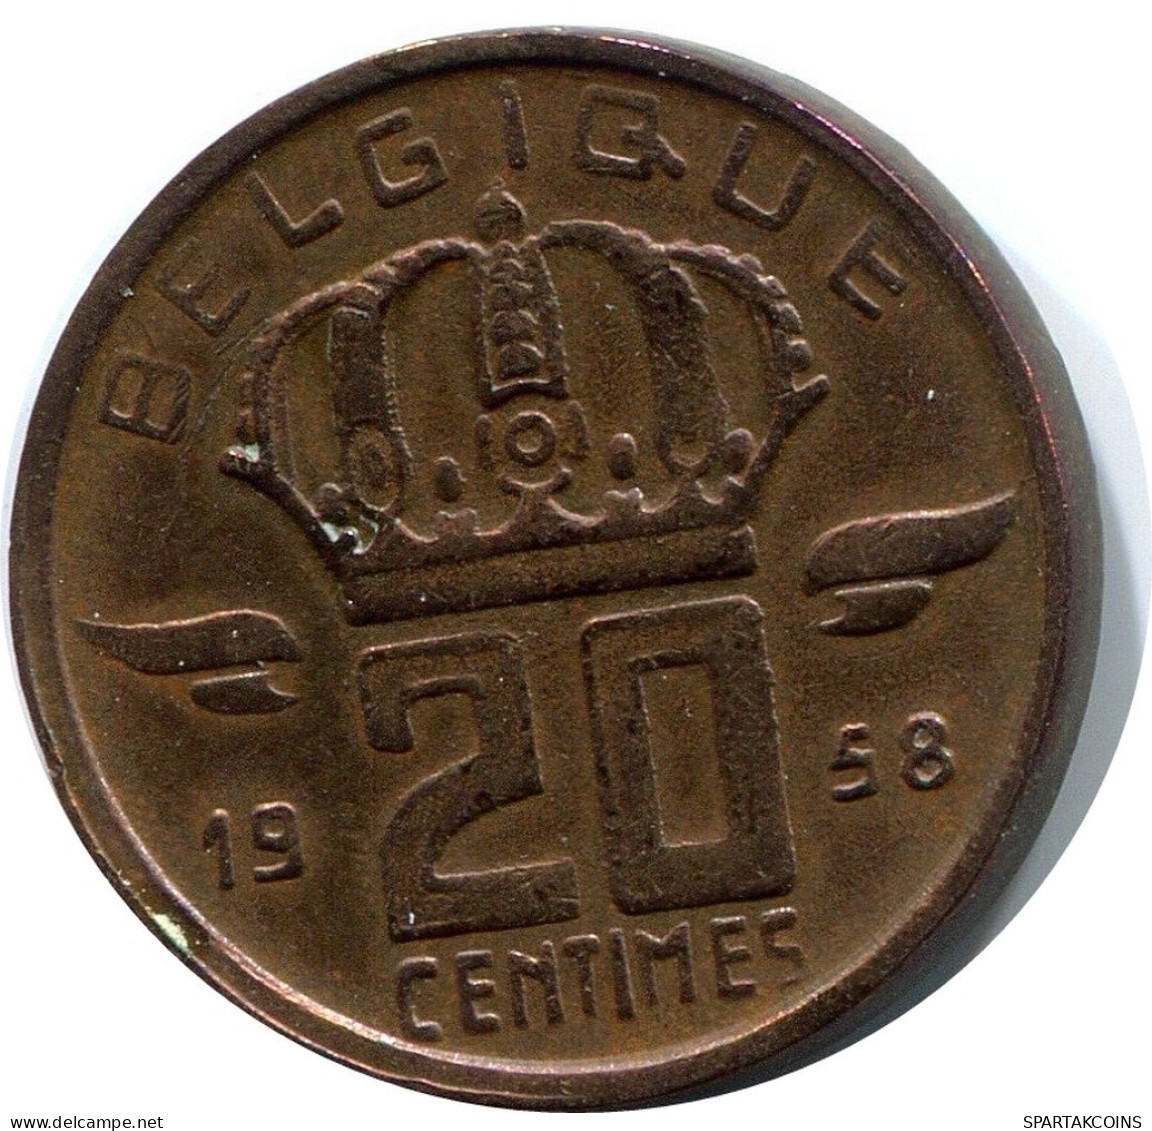 20 CENTIMES 1958 FRENCH Text BELGIUM Coin #BA398.U.A - 25 Cents